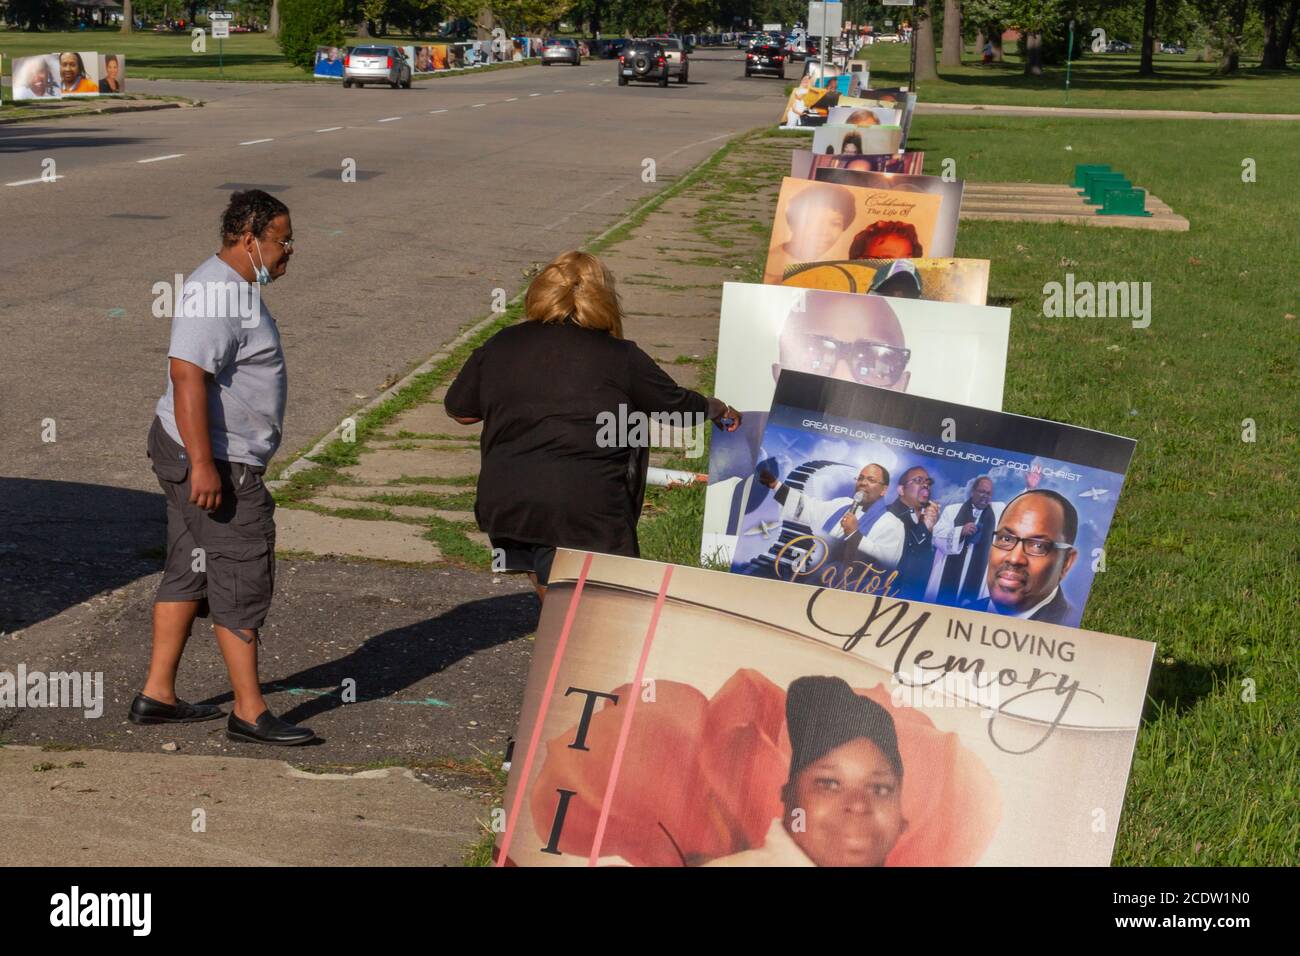 Detroit, Michigan, USA. 29th Aug, 2020. Portraits of Detroit residents who died from Covid-19 lined the roads of Belle Isle State Park as a citywide memorial. The nearly 900 portraits represent the 1,500 Detroiters who died from the virus through August 18. Credit: Jim West/Alamy Live News Stock Photo